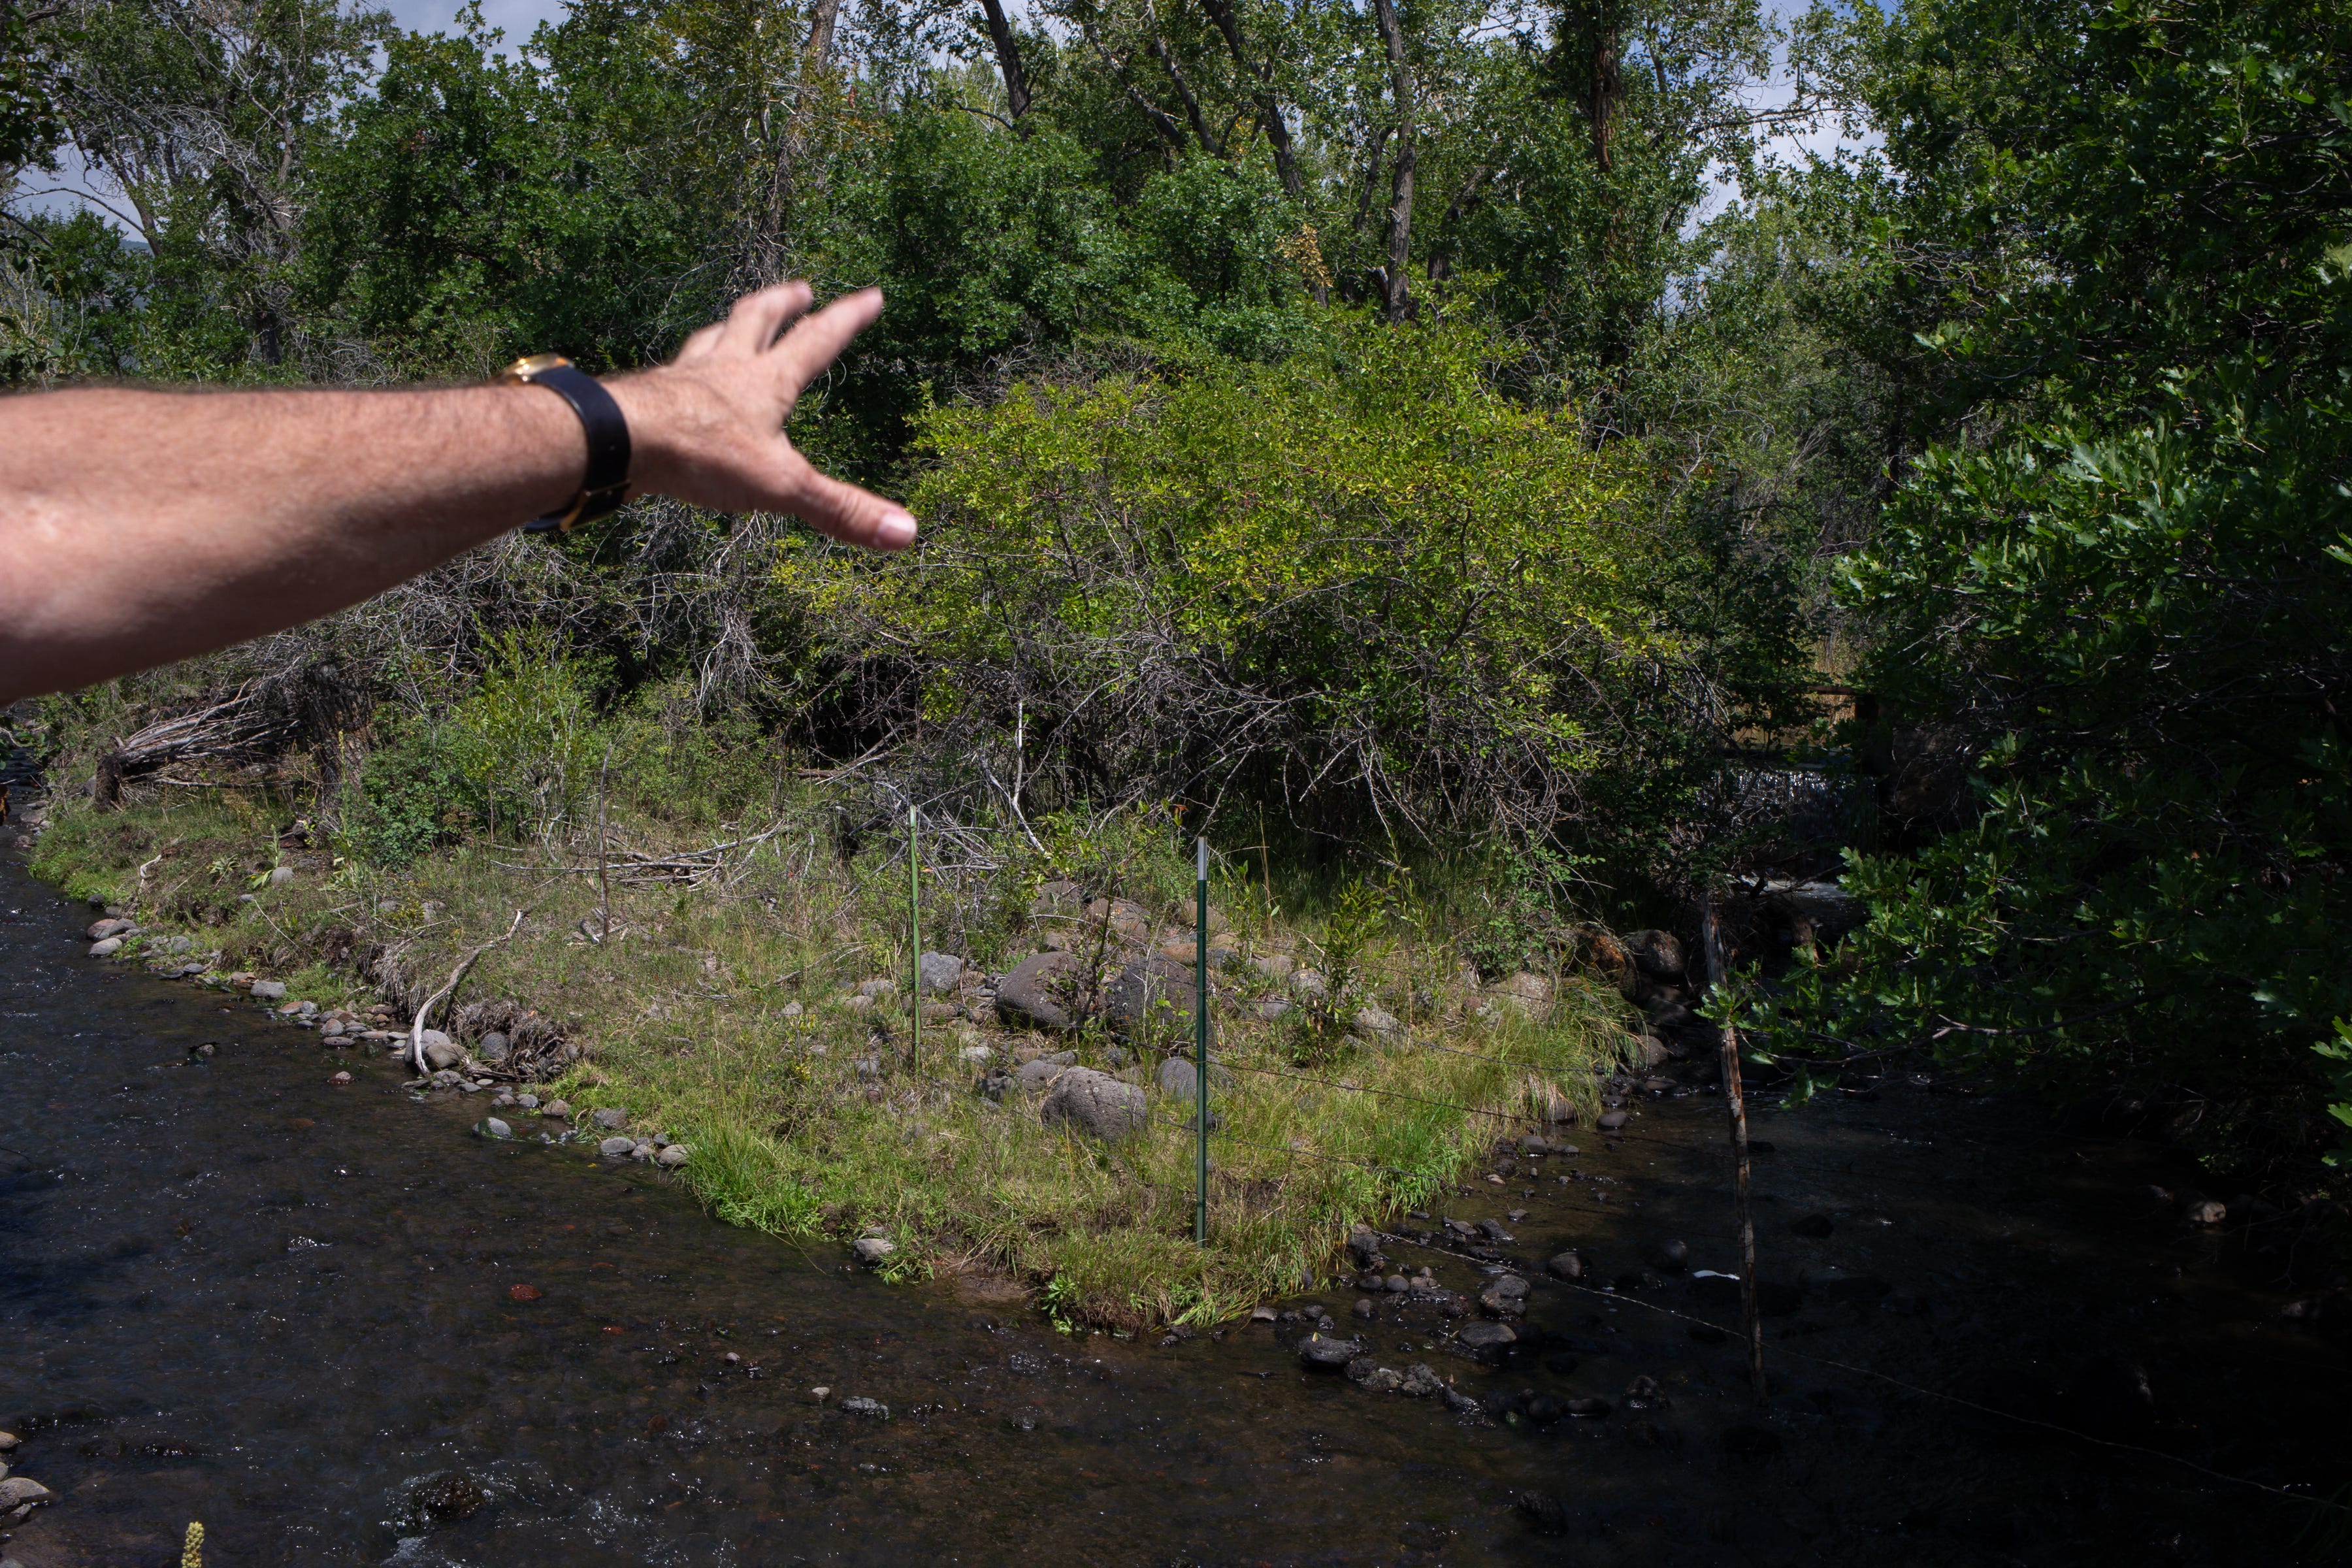 Lead water Commissioner James Holiman at the confluence of Kiser Creek (right) and Big Ditch (left) on Aug. 20, 2021, north of Cedaredge, Colorado.